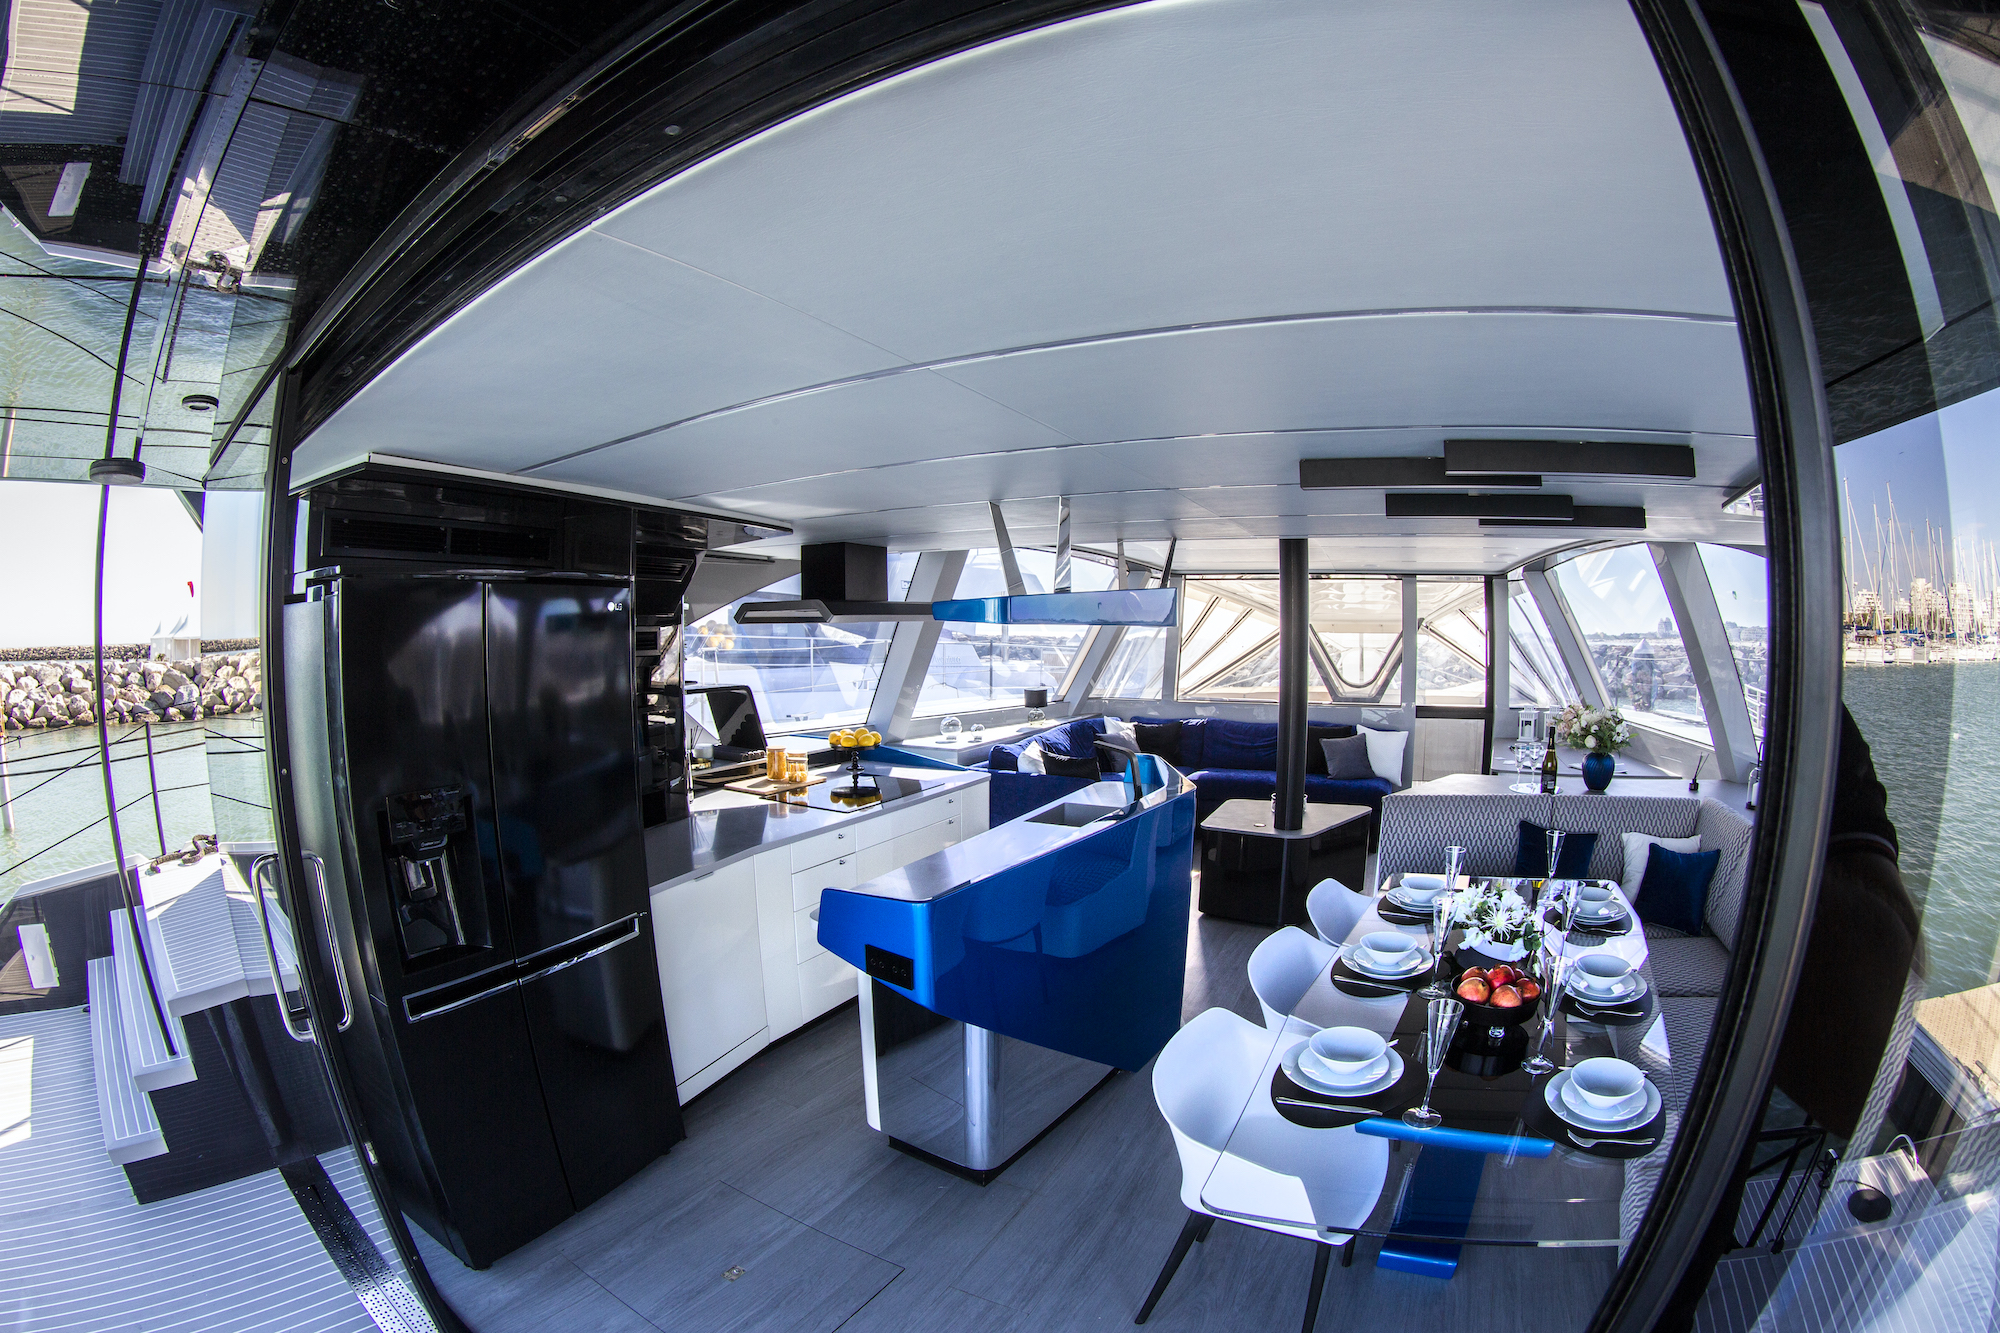 Galley And Seating